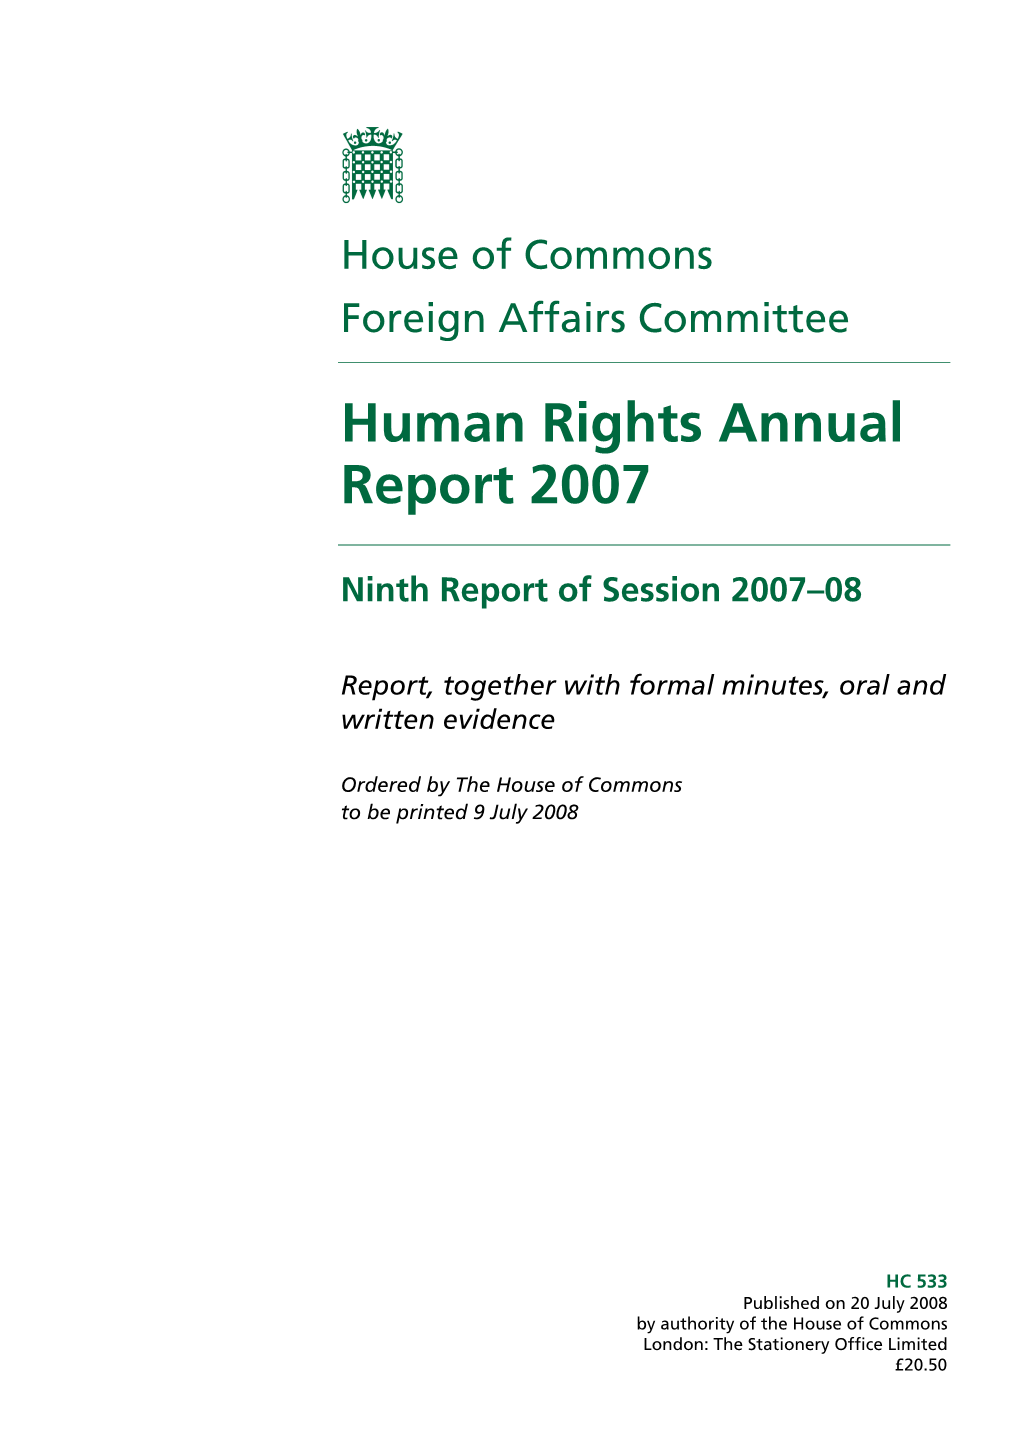 Human Rights Annual Report 2007